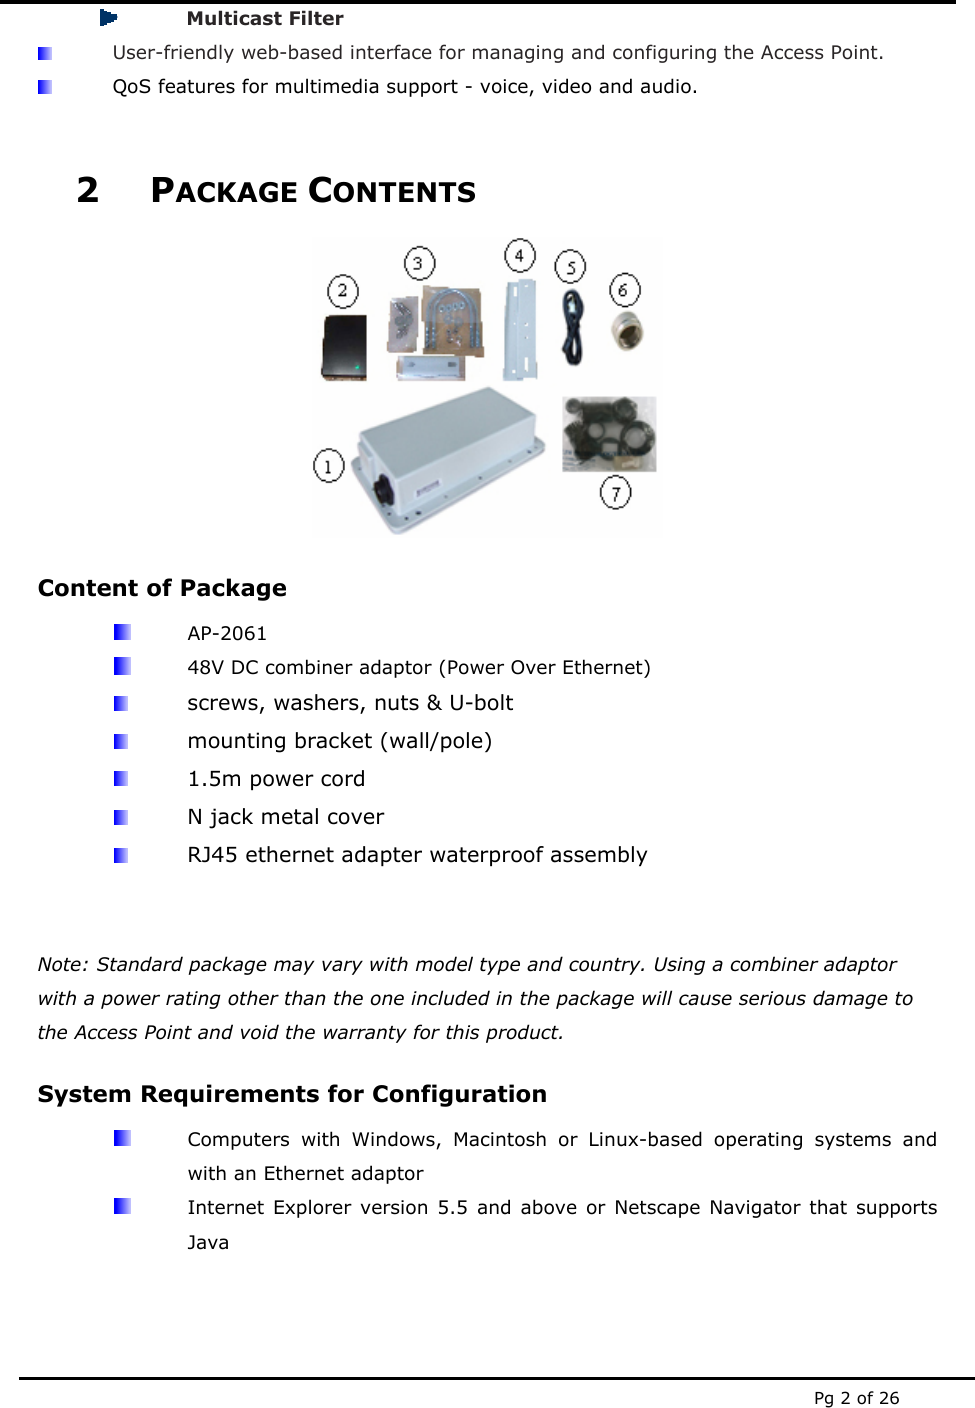  Pg 2 of 26  Multicast Filter  User-friendly web-based interface for managing and configuring the Access Point.  QoS features for multimedia support - voice, video and audio.  2 PACKAGE CONTENTS  Content of Package  AP-2061   48V DC combiner adaptor (Power Over Ethernet)  screws, washers, nuts &amp; U-bolt  mounting bracket (wall/pole)  1.5m power cord  N jack metal cover  RJ45 ethernet adapter waterproof assembly   Note: Standard package may vary with model type and country. Using a combiner adaptor with a power rating other than the one included in the package will cause serious damage to the Access Point and void the warranty for this product. System Requirements for Configuration   Computers with Windows, Macintosh or Linux-based operating systems and with an Ethernet adaptor   Internet Explorer version 5.5 and above or Netscape Navigator that supports Java   